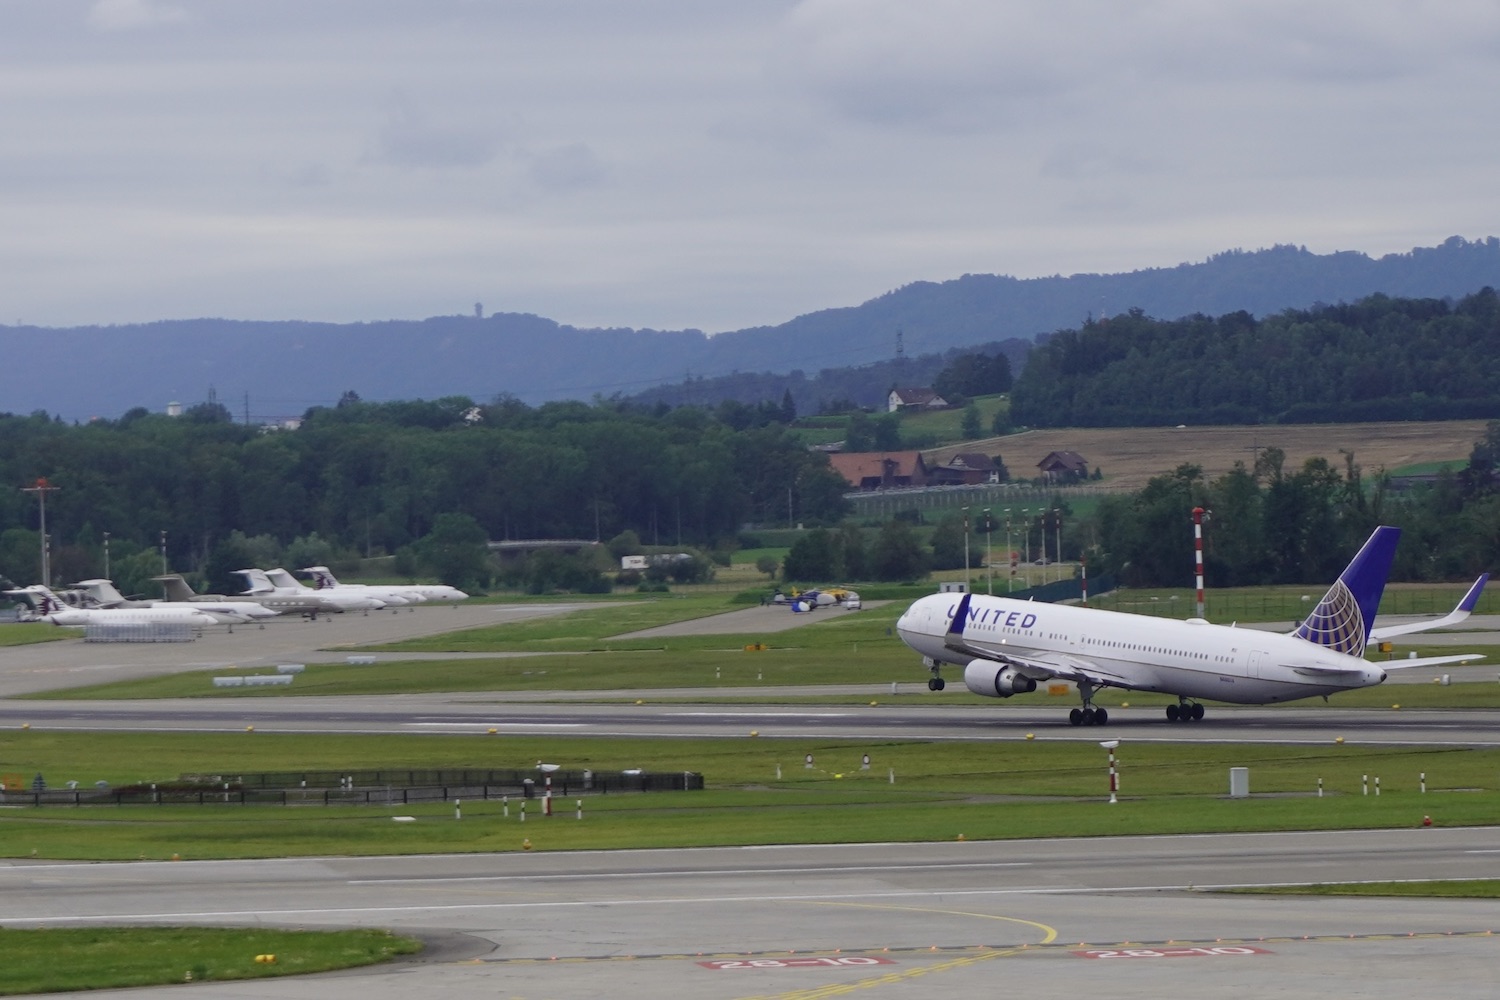 A United Airlines aircraft taking off from the runway at the Zurich Airport in front of the Swiss Alps.